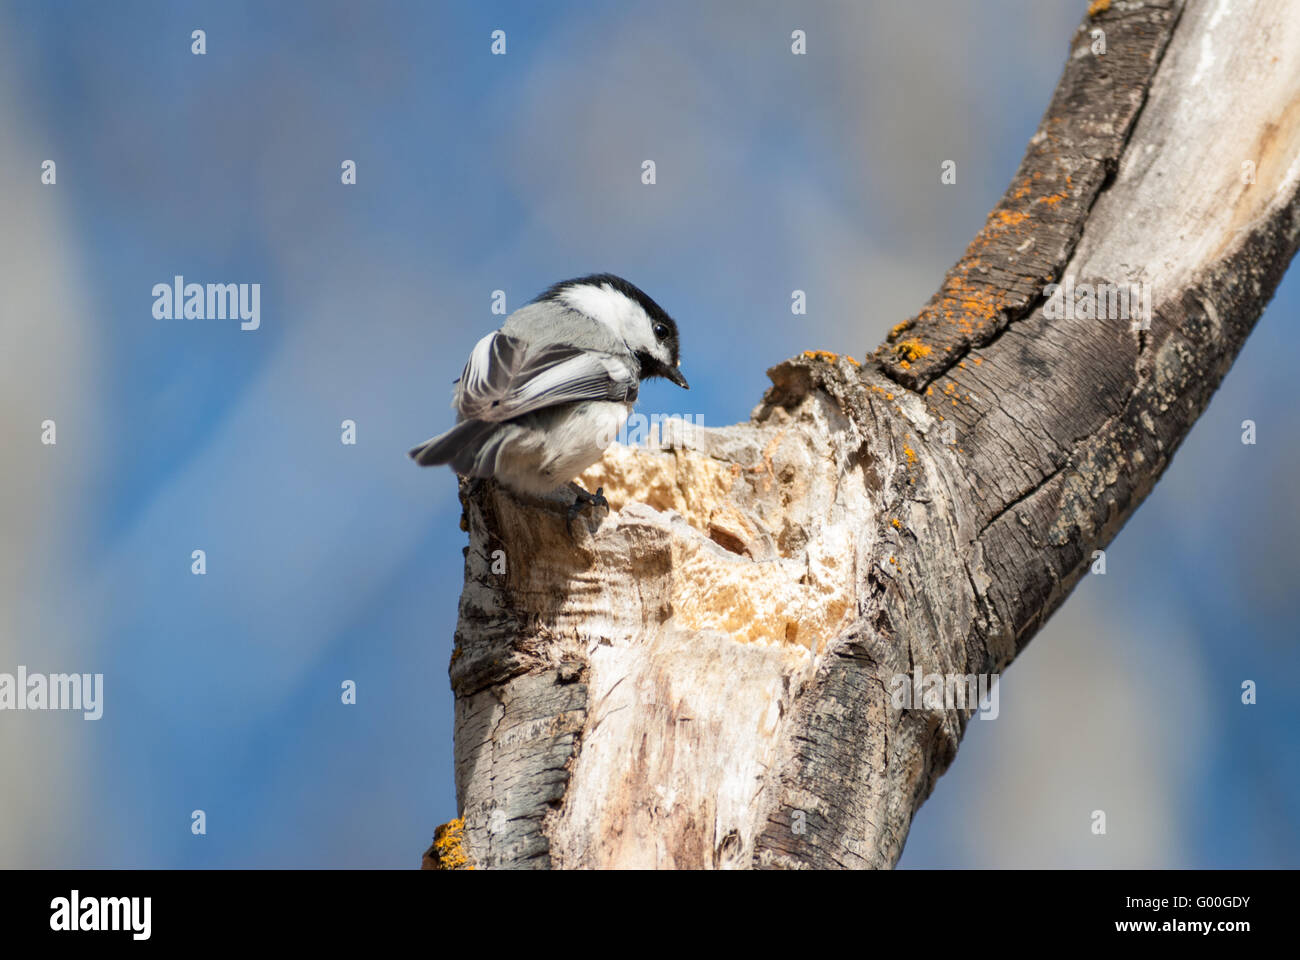 A black-capped chickadee, Poecile atricapillus, standing outside a nesting hole it is preparing for use. Stock Photo